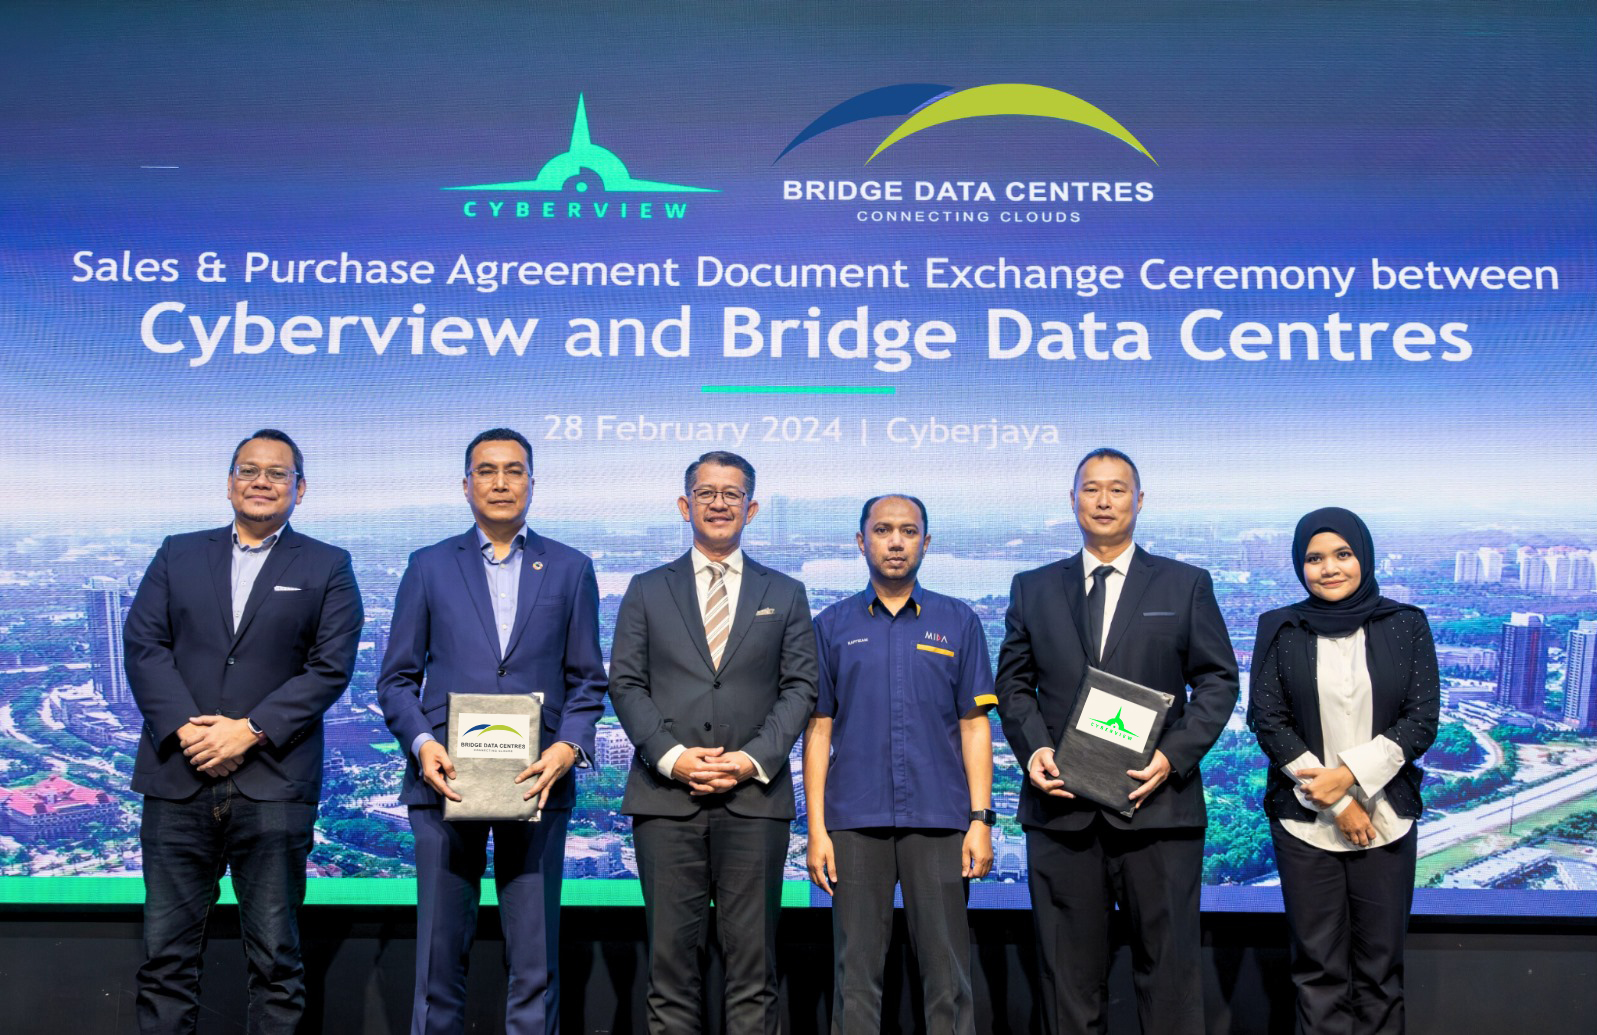 L-R: Roni Shah Mustapha, head of Business Venture & Partnership Division, Cyberview; Kamarul Ariffin Abdul Saman, CEO Cyberview; Hasan Azhari Hj. Idris, CEO Invest Selangor; Haffizam Abu Seman, deputy director, Business Services & Regional Operations Division, MIDA; Patrick Png, vice president of Solutions, APAC Bridge Data Centres; Lily Azman, manager, Government & Business Relations, Bridge Data Centres